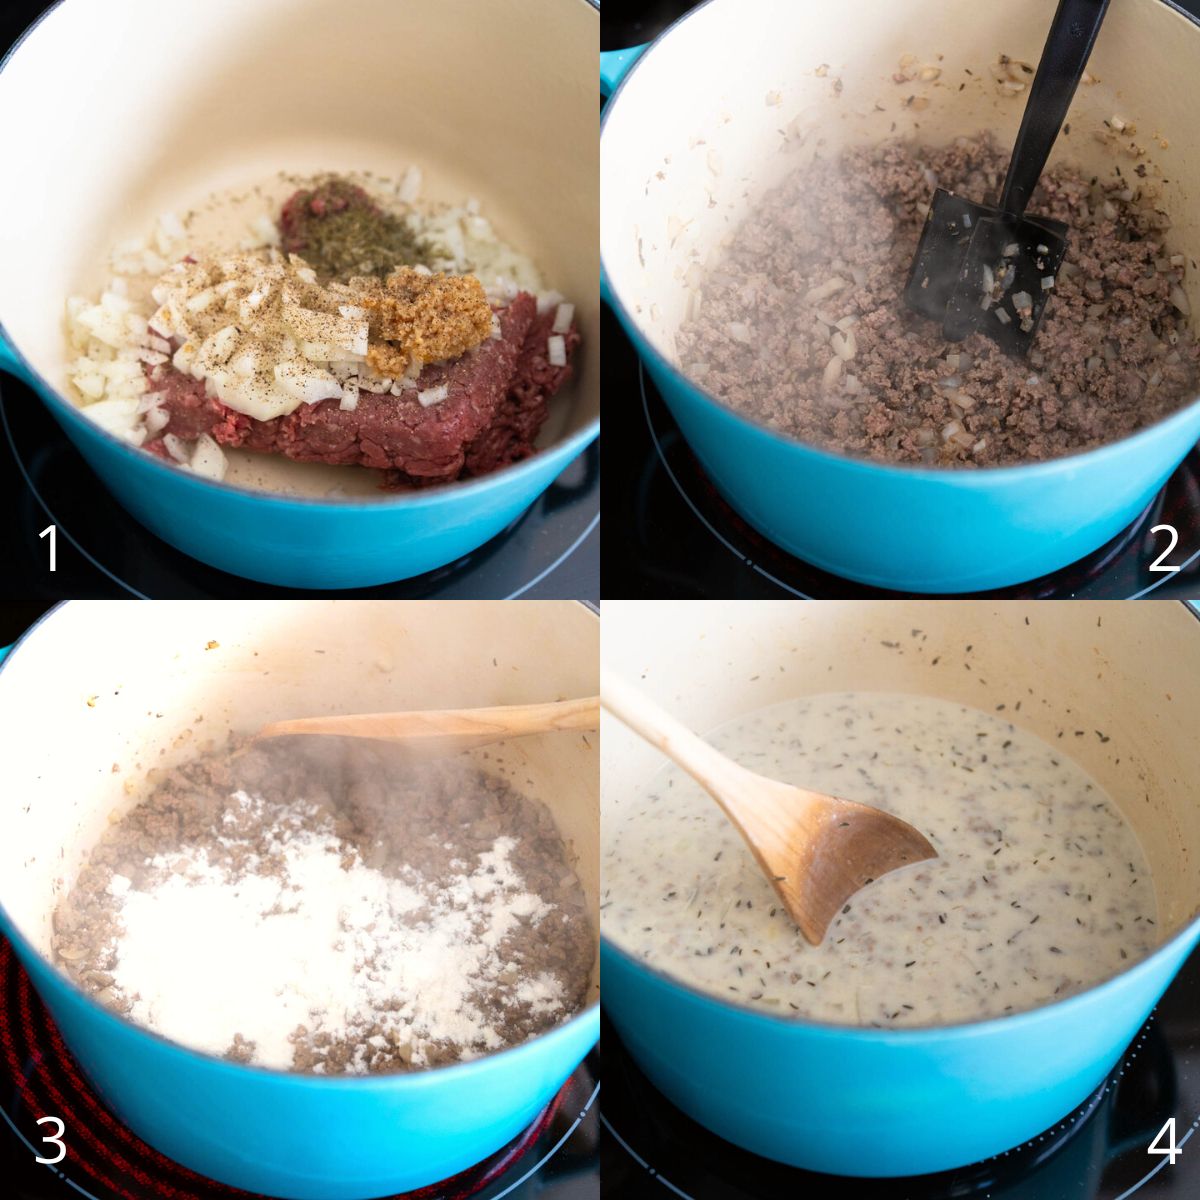 The step by step photos show how to assemble the ground beef filling in a blue Dutch oven.